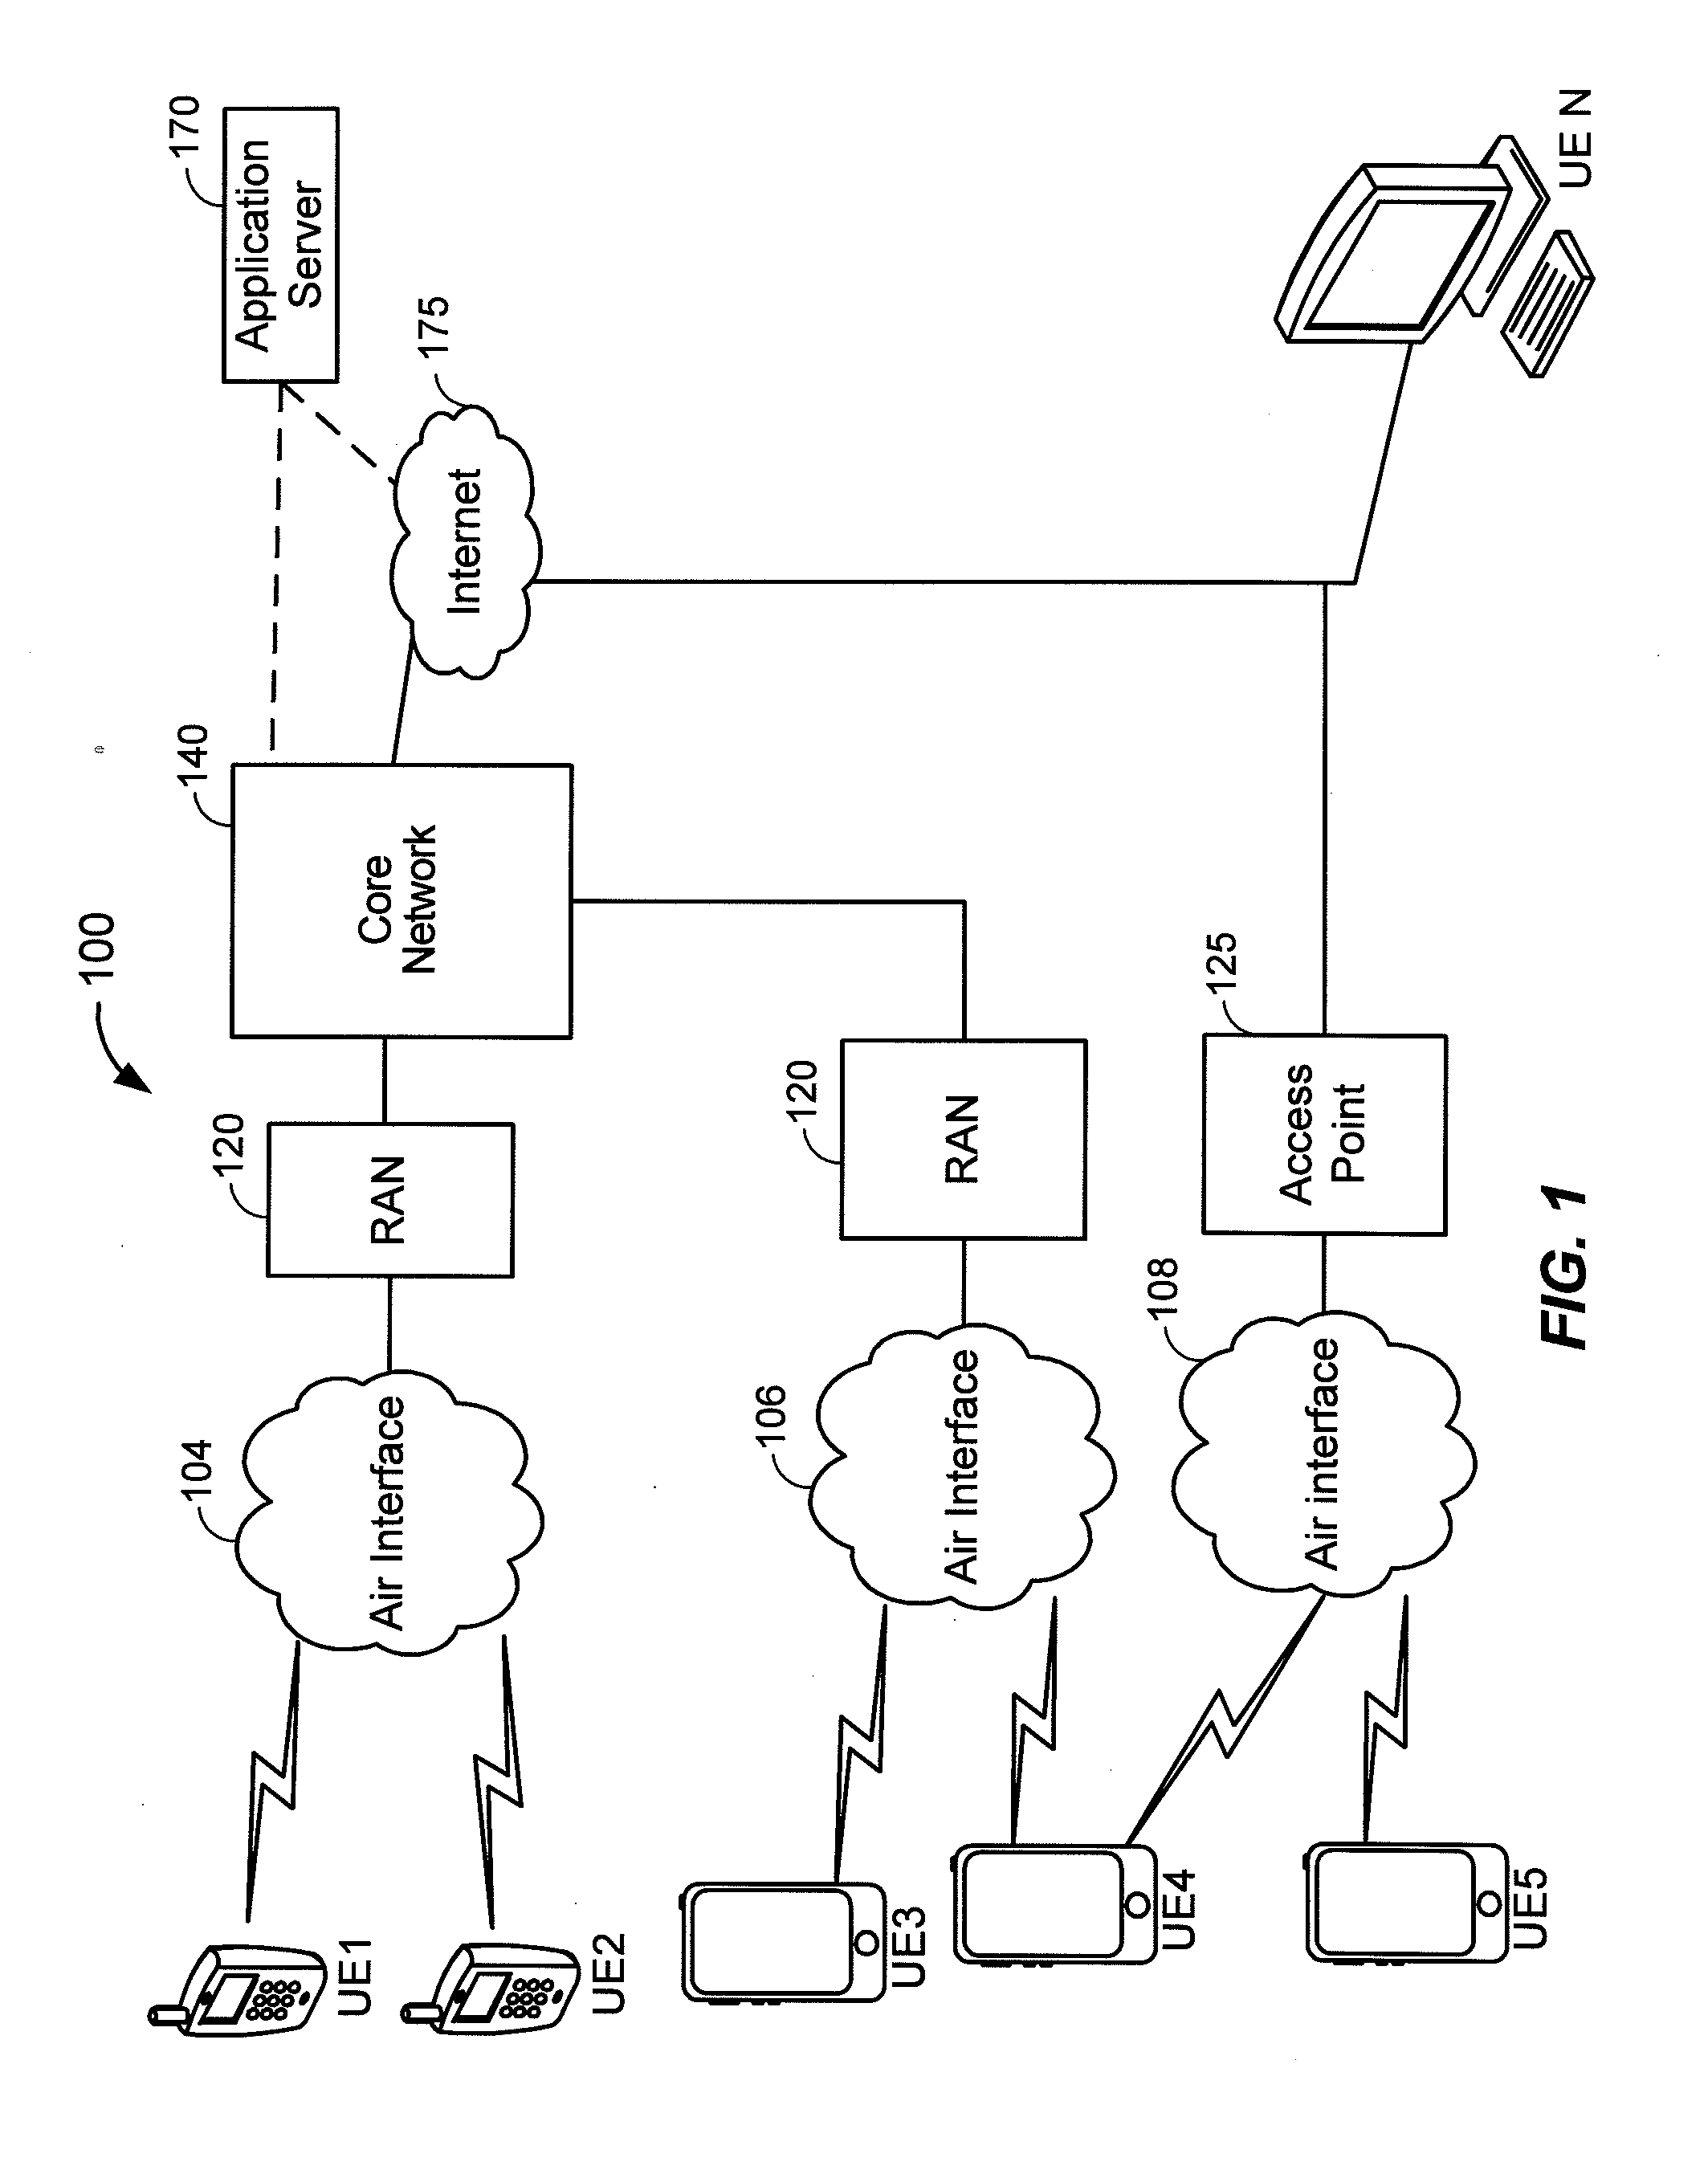 Method for storing and sharing a history of interactions between devices in a network